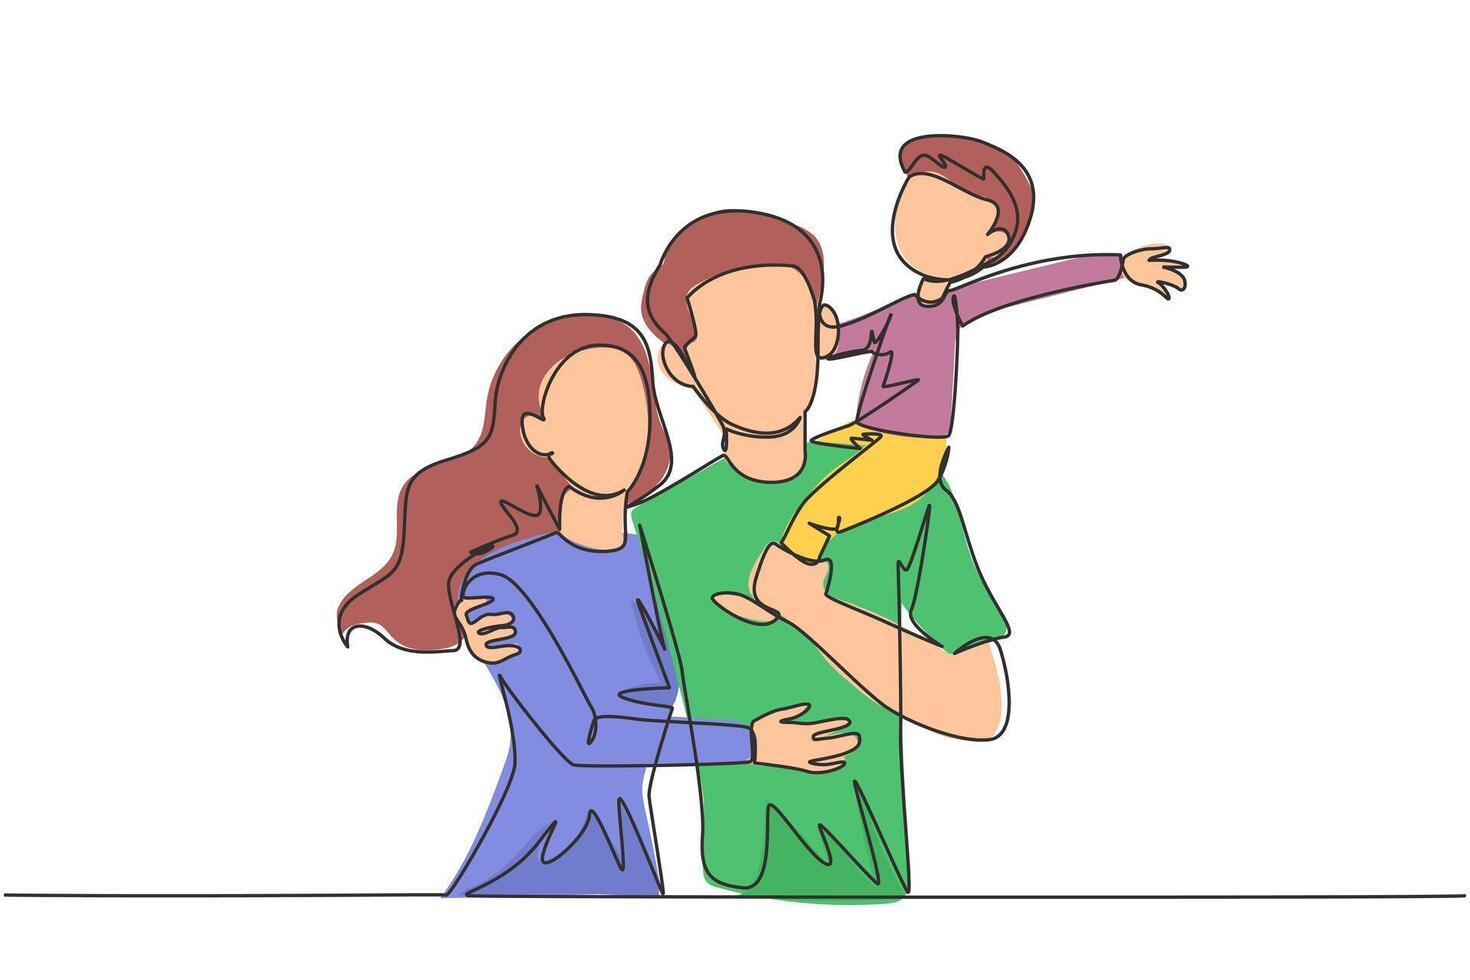 Single one line drawing of young woman hug her handsome husband who is holding their little cute son. Smiling couple with child. Happy family concept. Continuous line design graphic illustration vector